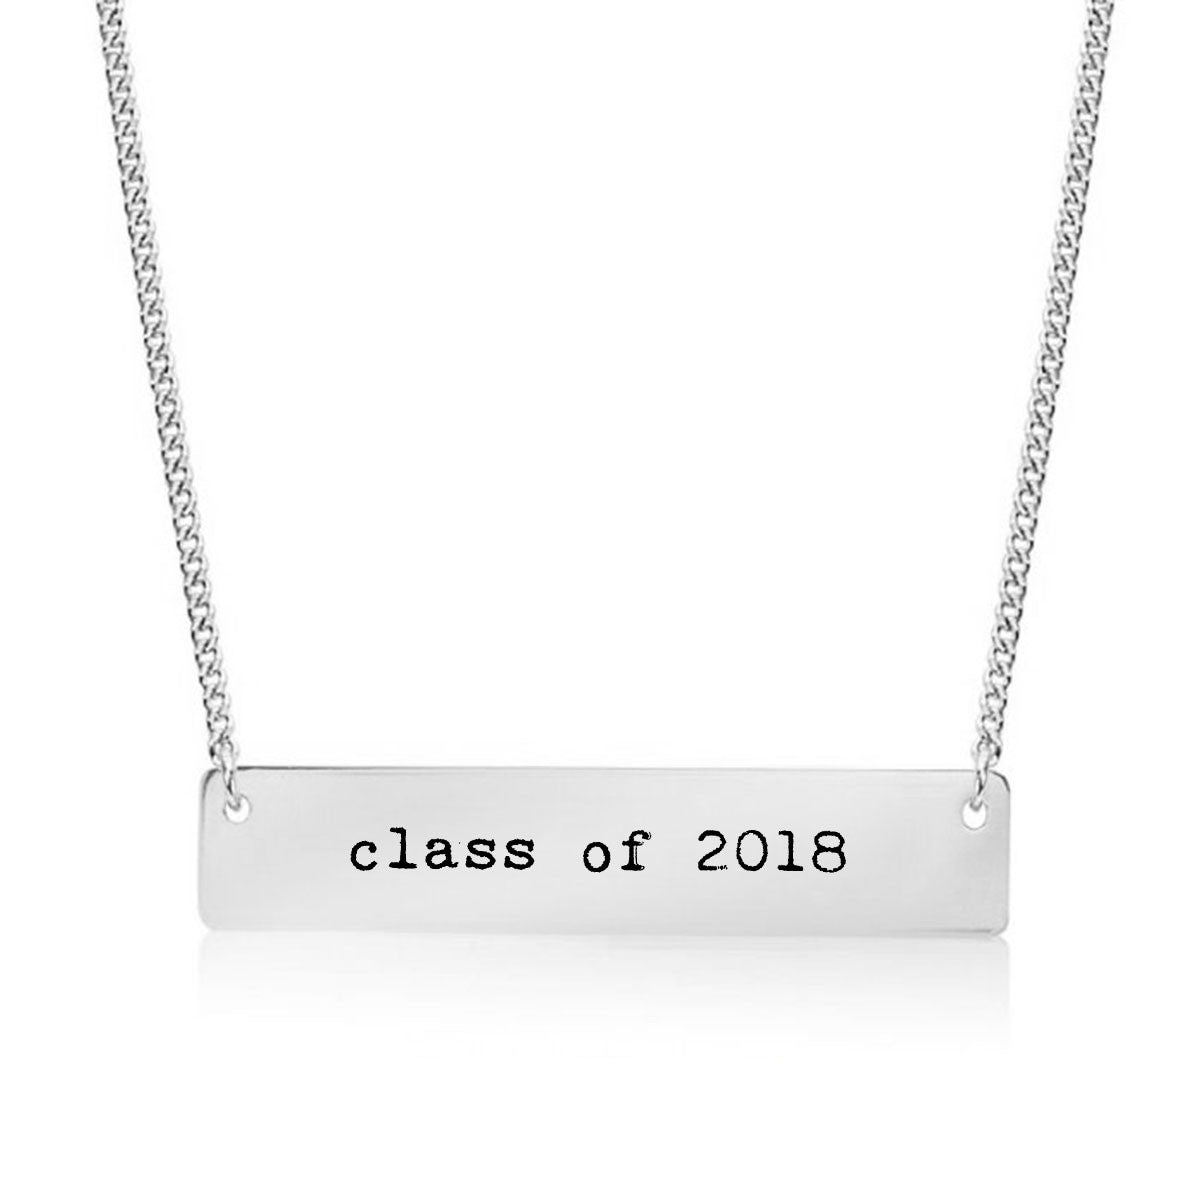 Class of 2018 Gold / Silver Bar Necklace - pipercleo.com